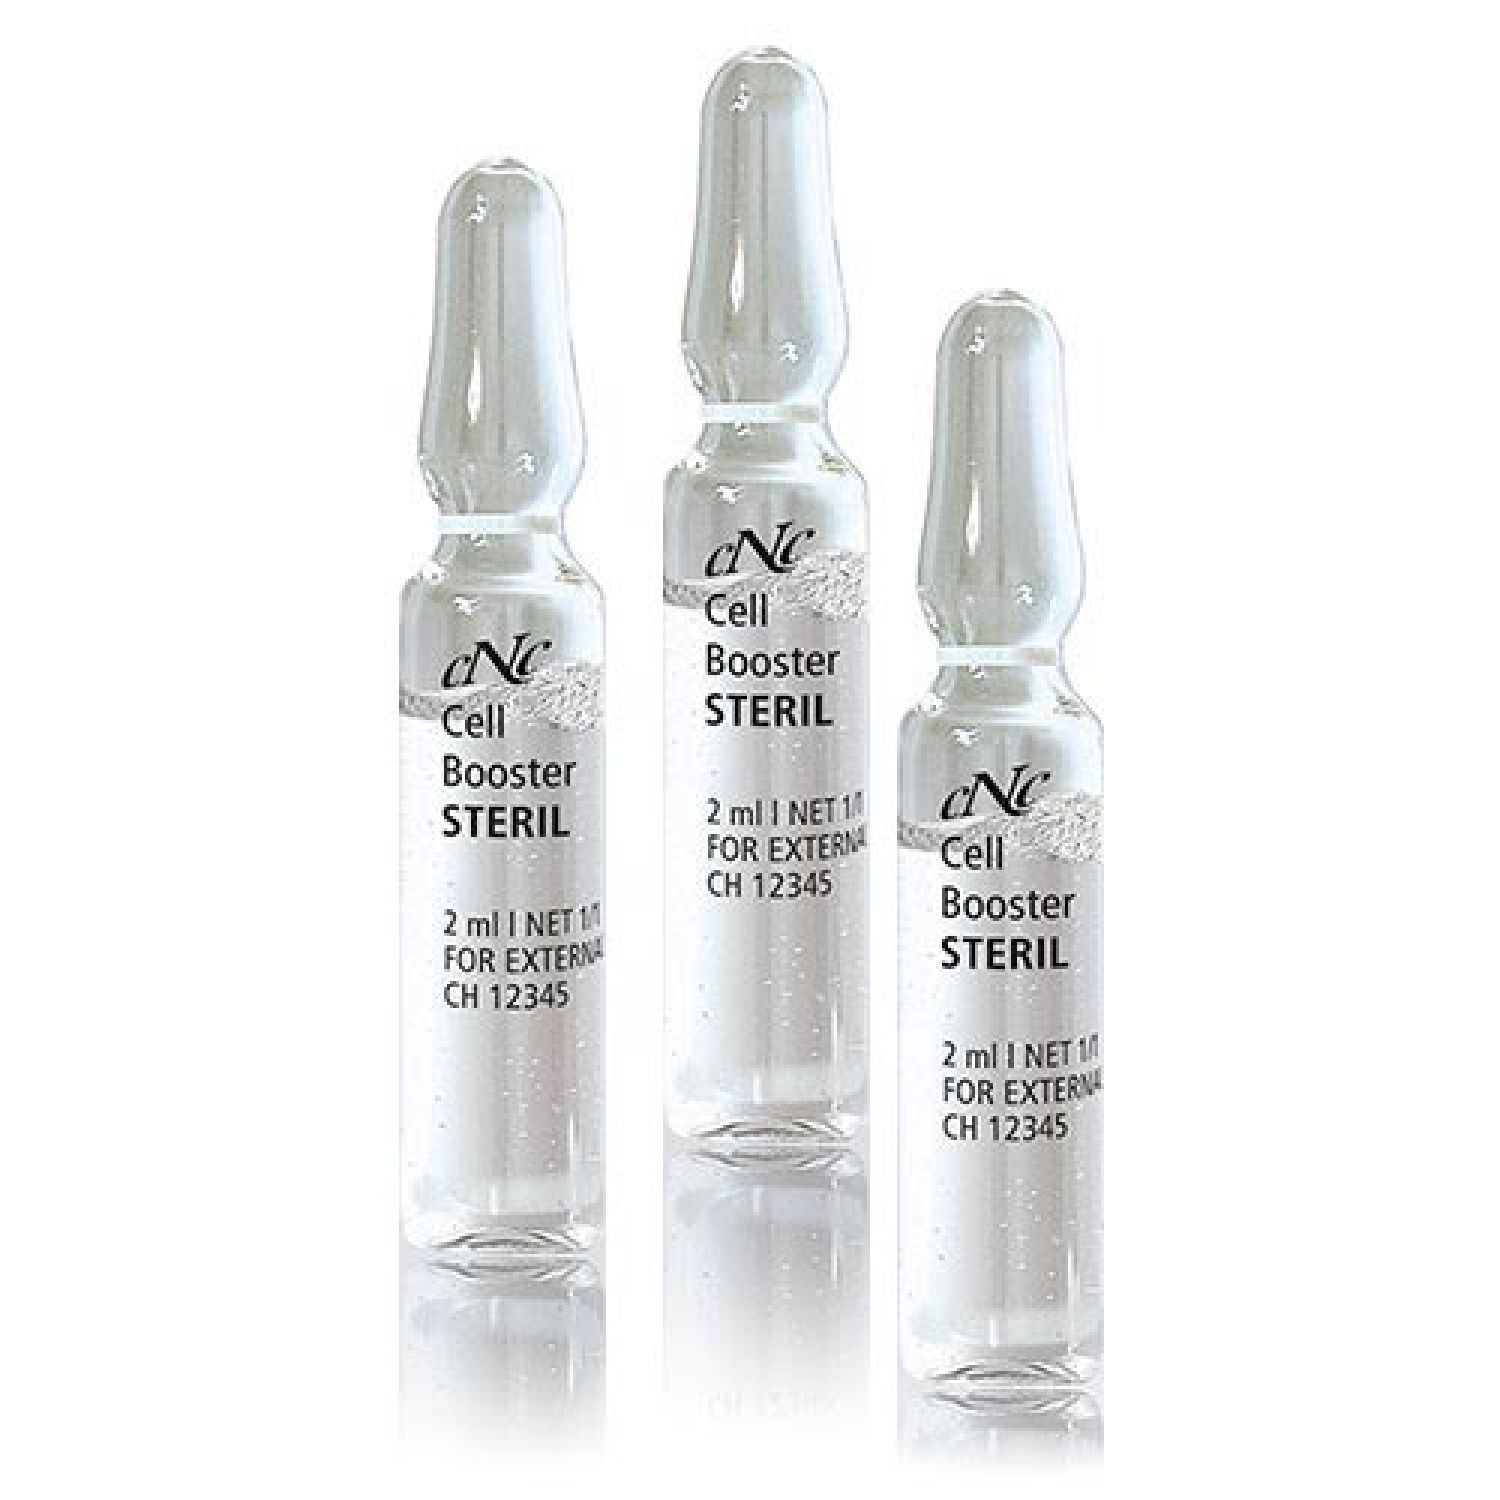 CNC cosmetic Wirkstoffampullen Cell Booster Serum steril